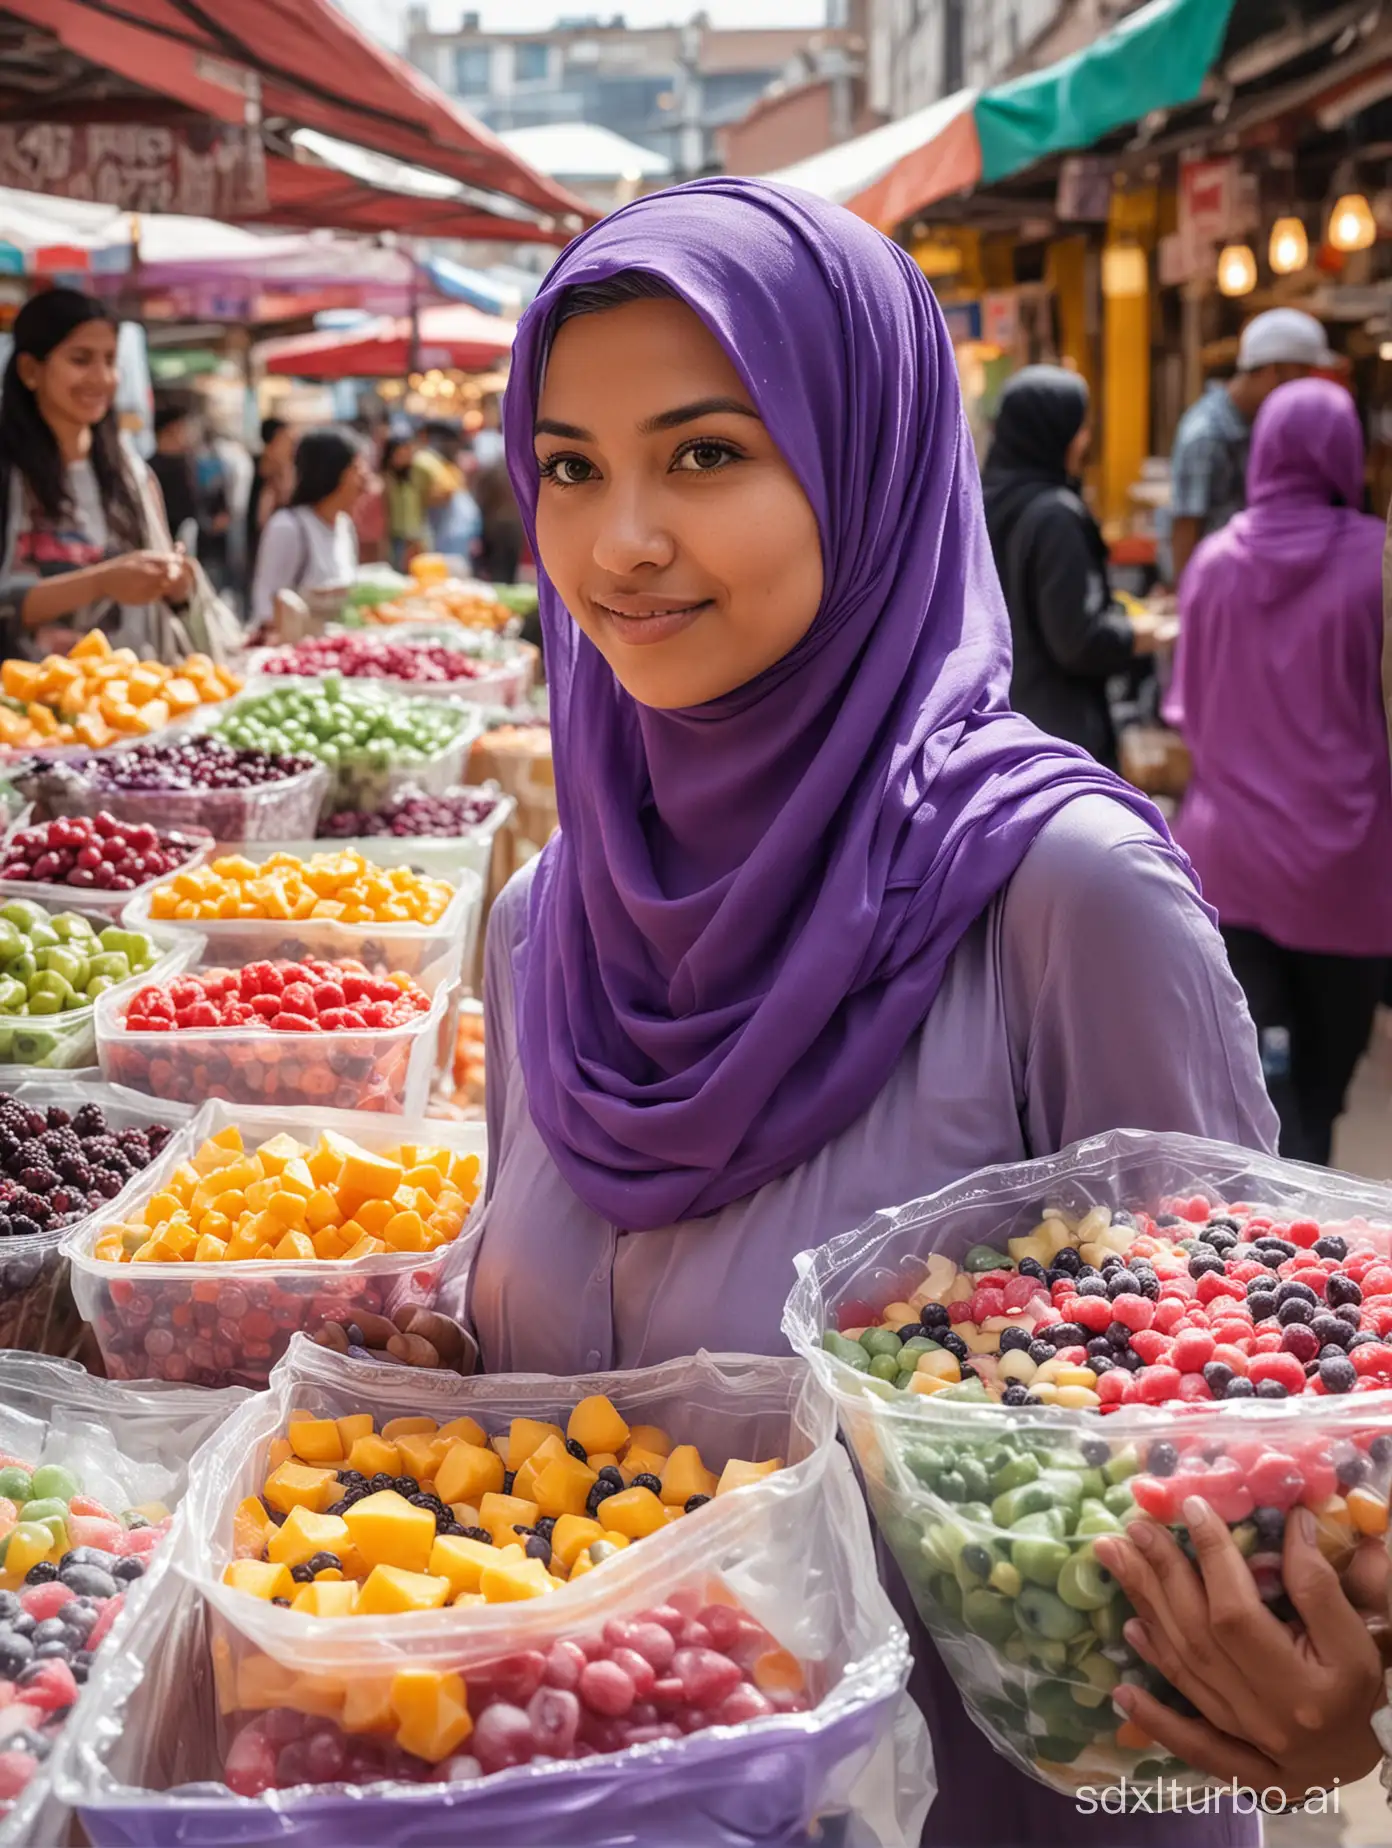 A woman shops at the market, holding a large transparent plastic bag full of colorful fruit soup and giant Boba ice. She wore a purple top and a purple hijab. The background is busy, showing a market atmosphere with people shopping and various goods being sold.